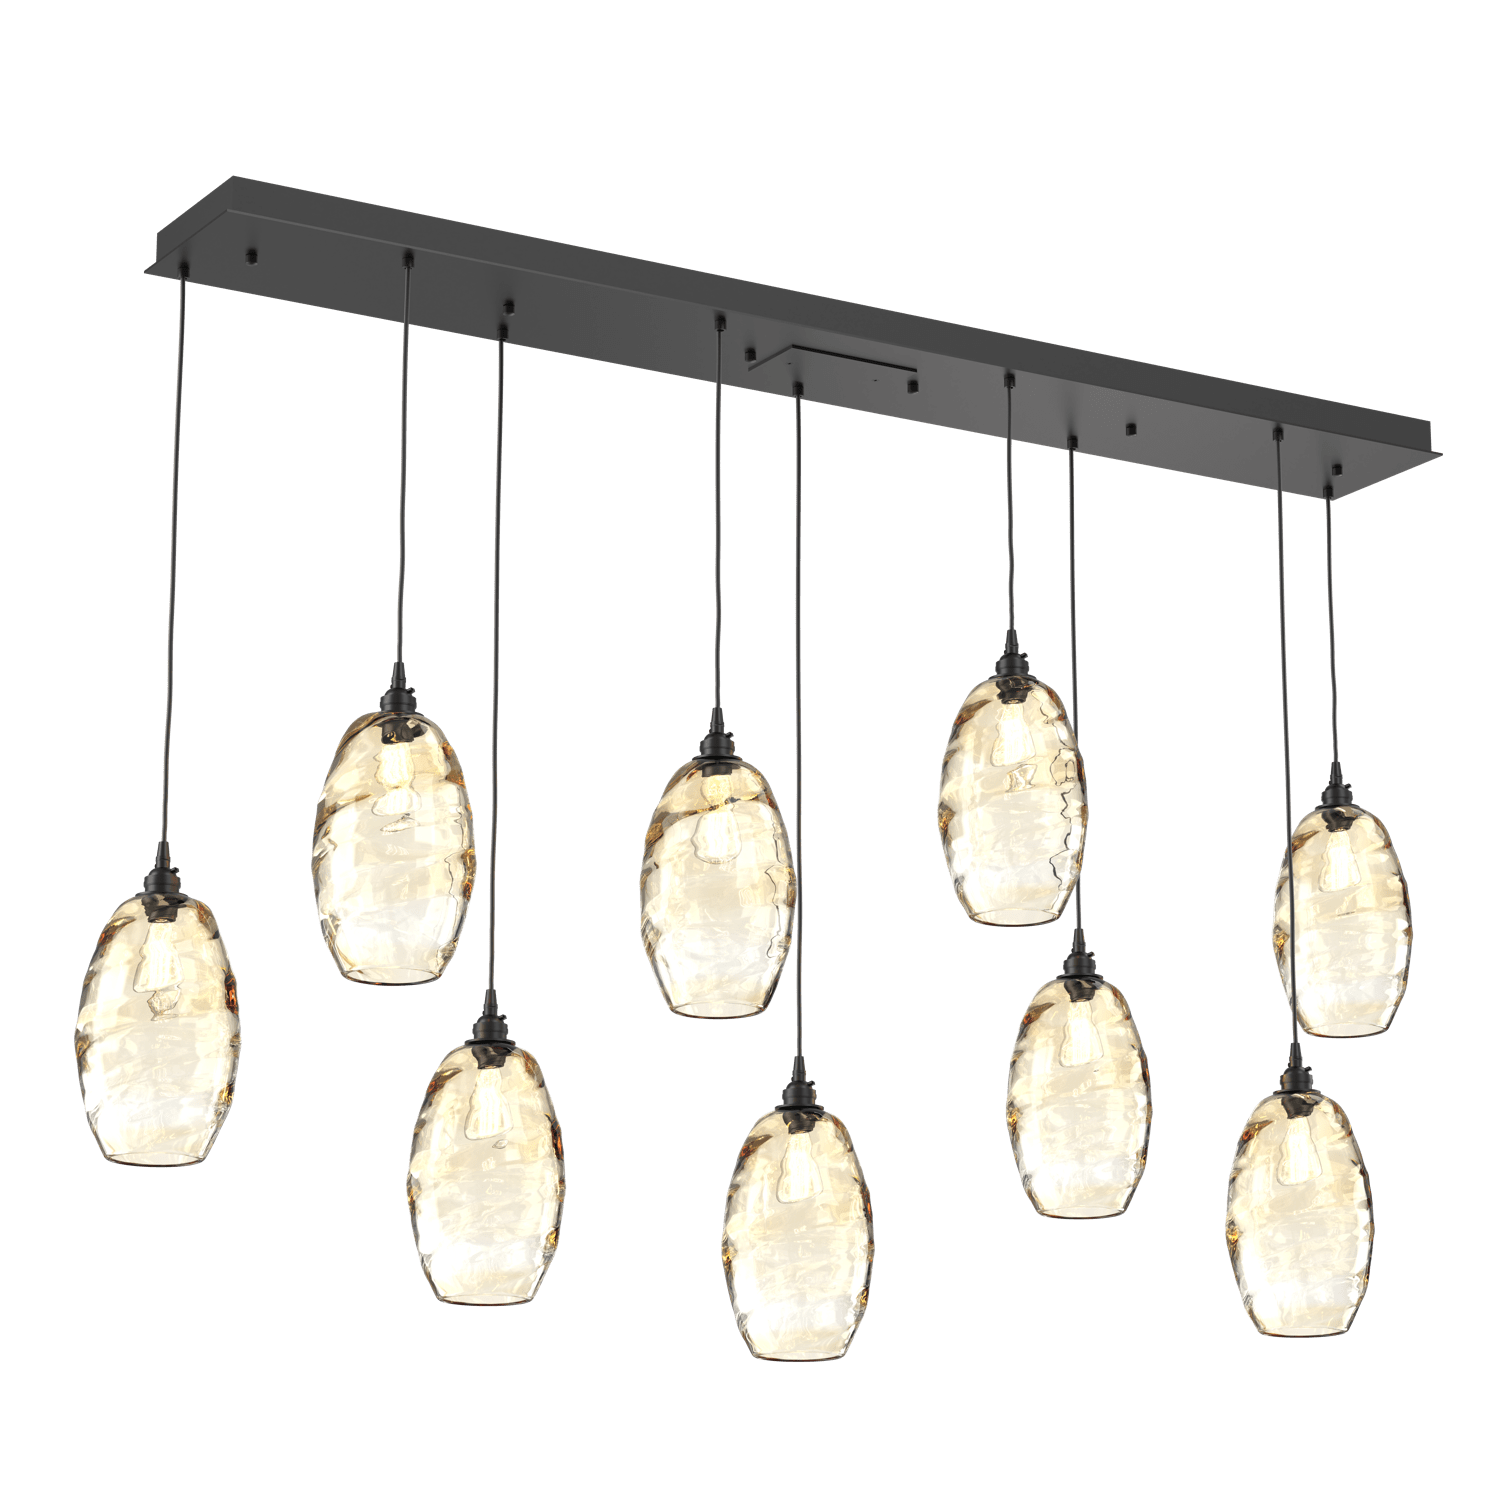 PLB0035-09-MB-OA-Hammerton-Studio-Optic-Blown-Glass-Elisse-9-light-linear-pendant-chandelier-with-matte-black-finish-and-optic-amber-blown-glass-shades-and-incandescent-lamping